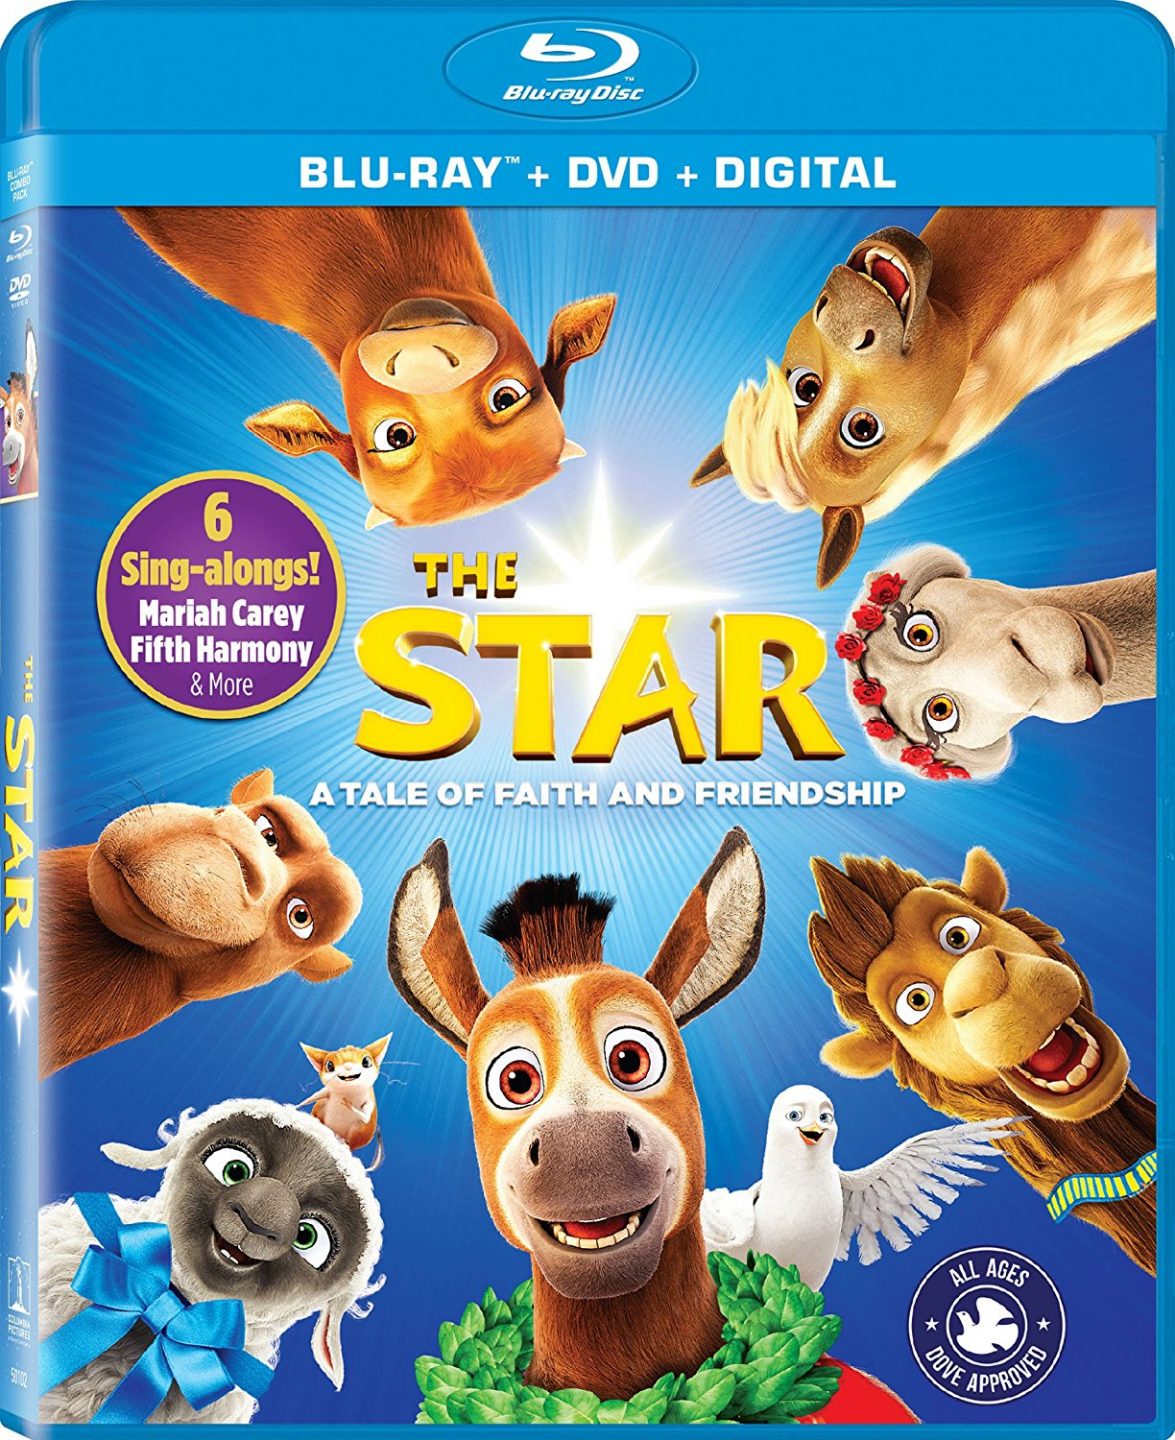 The Star Blu-Ray Combo cover (AFFIRM Films/Sony Pictures Home Entertainment)